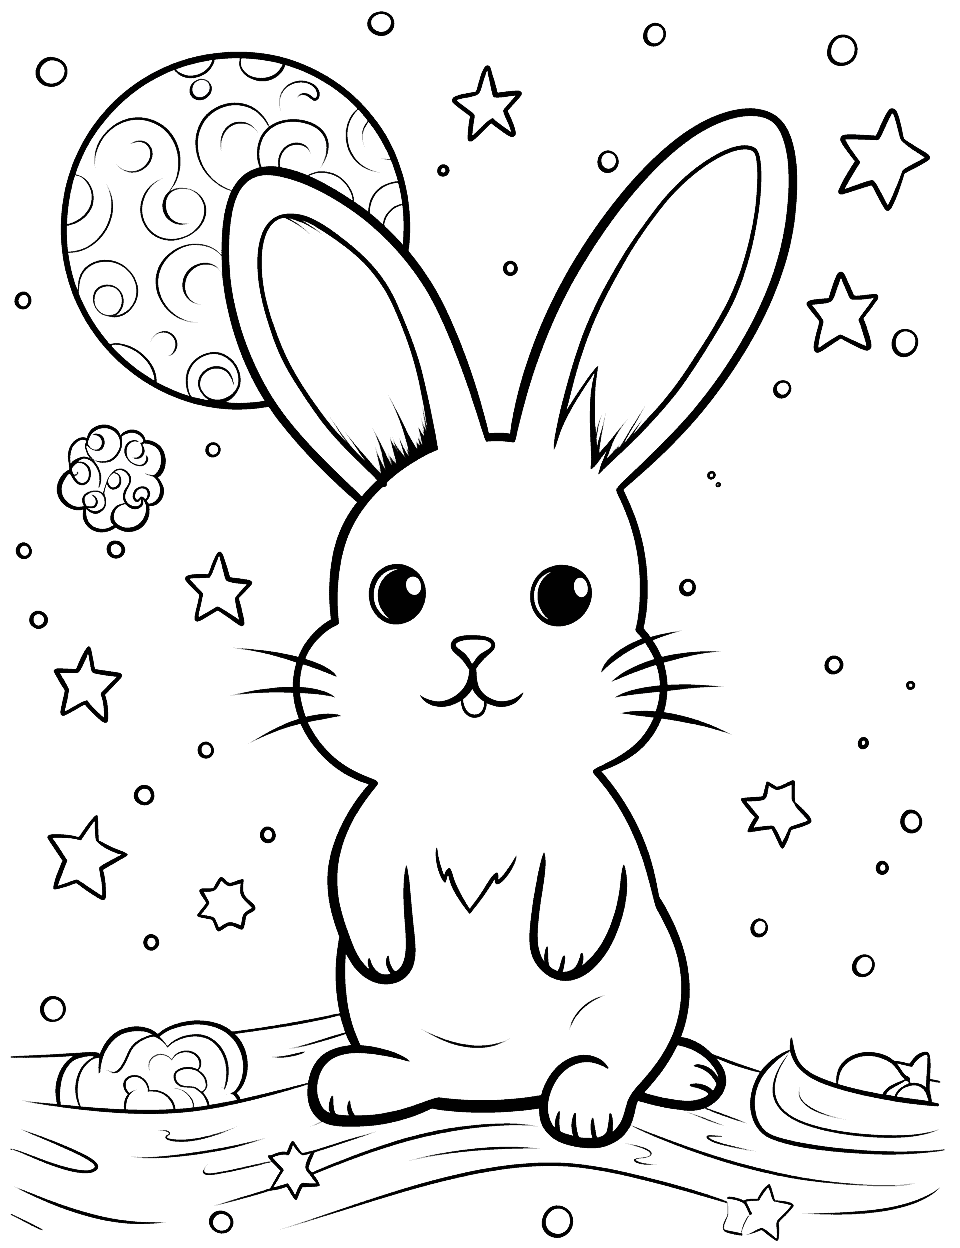 Galaxy Bunny Among the Stars Coloring Page - A bunny in space, surrounded by planets, stars, and cosmic wonders.